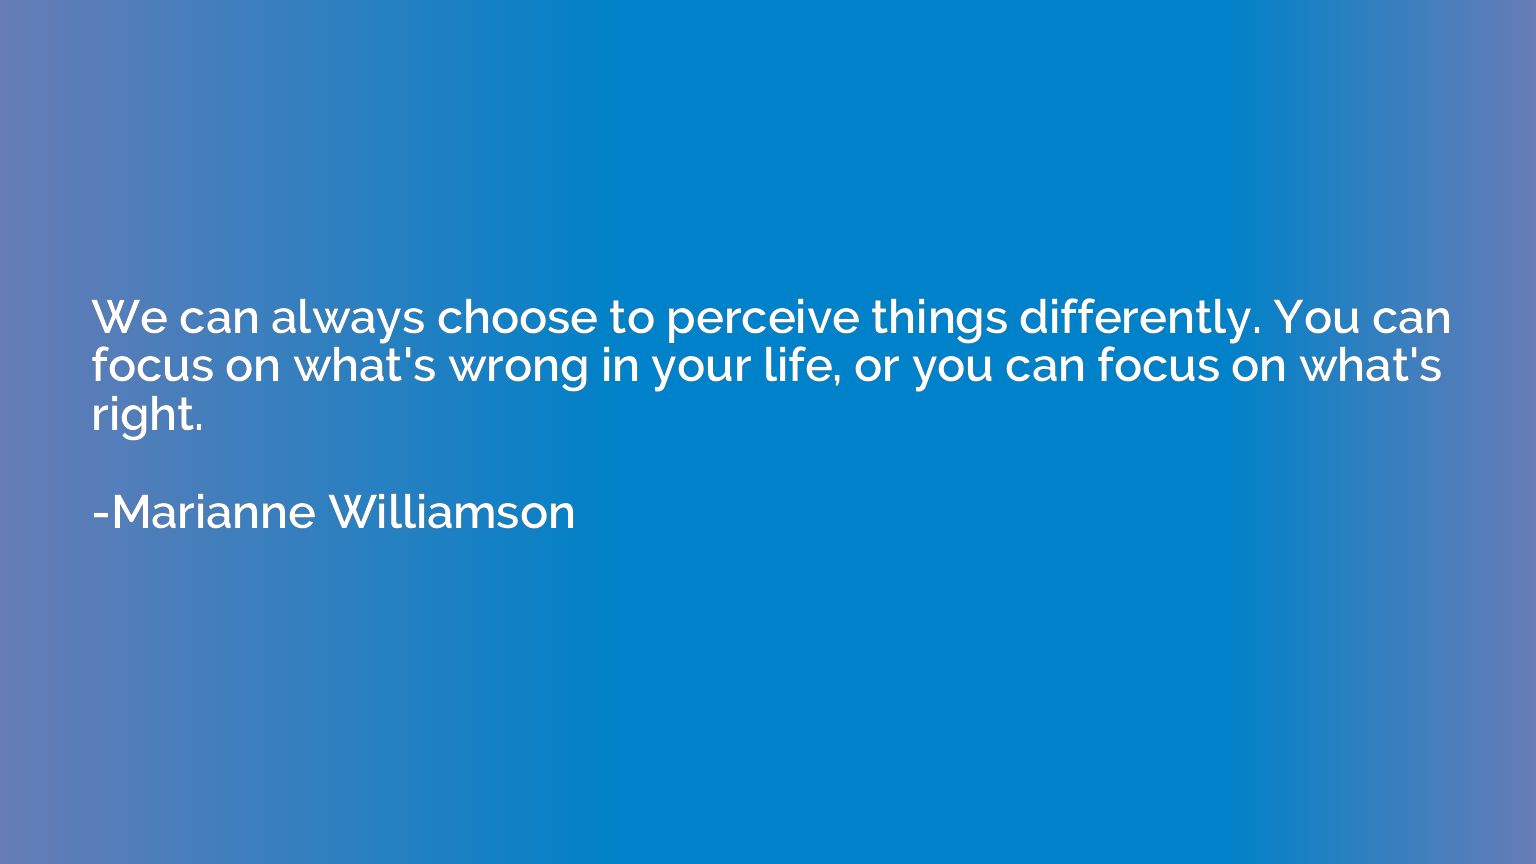 We can always choose to perceive things differently. You can